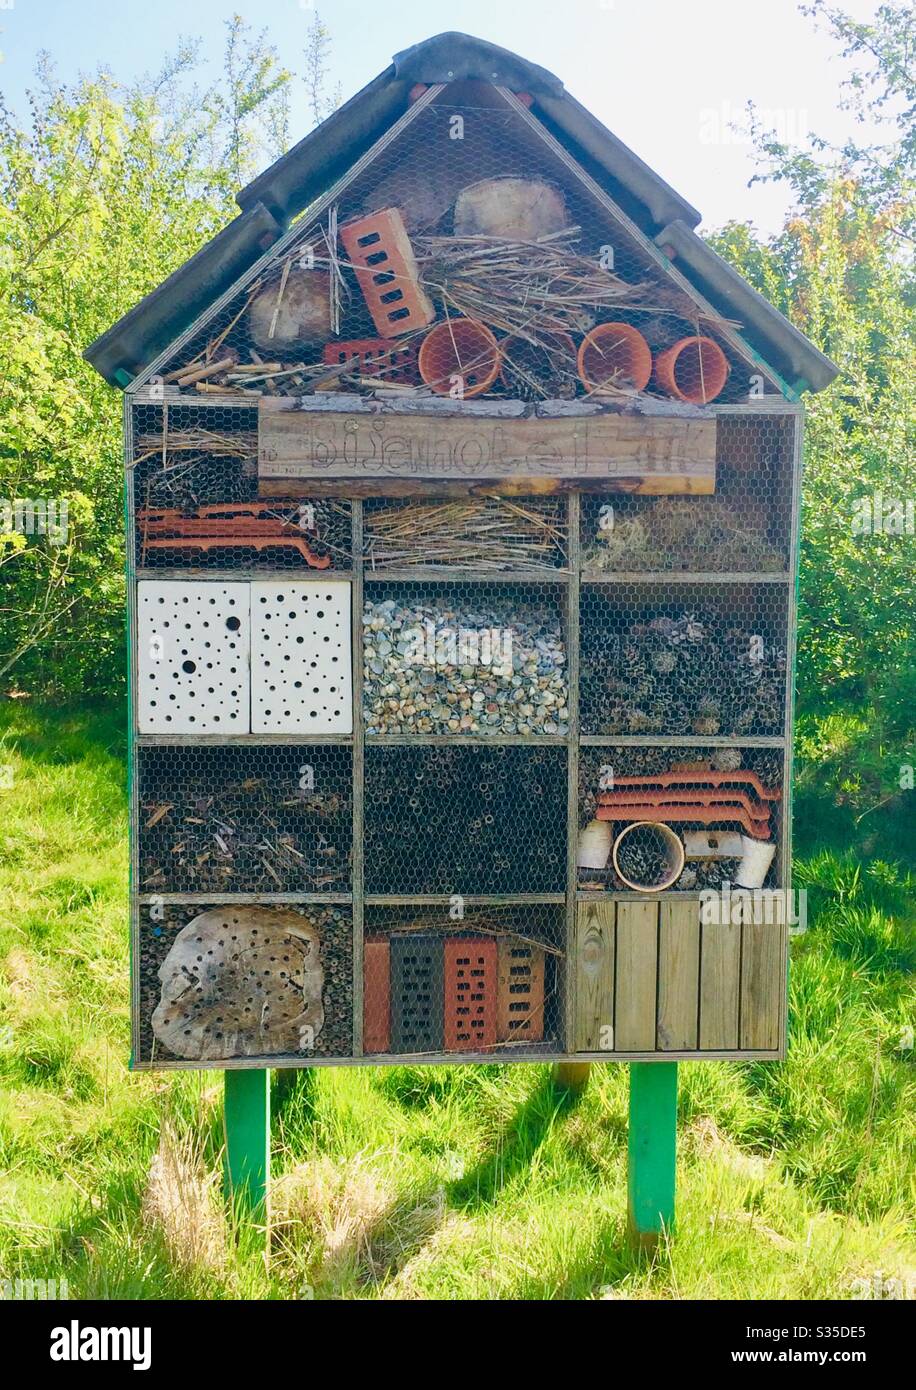 Insect Hotel 2. A park in The Netherlands. Stock Photo